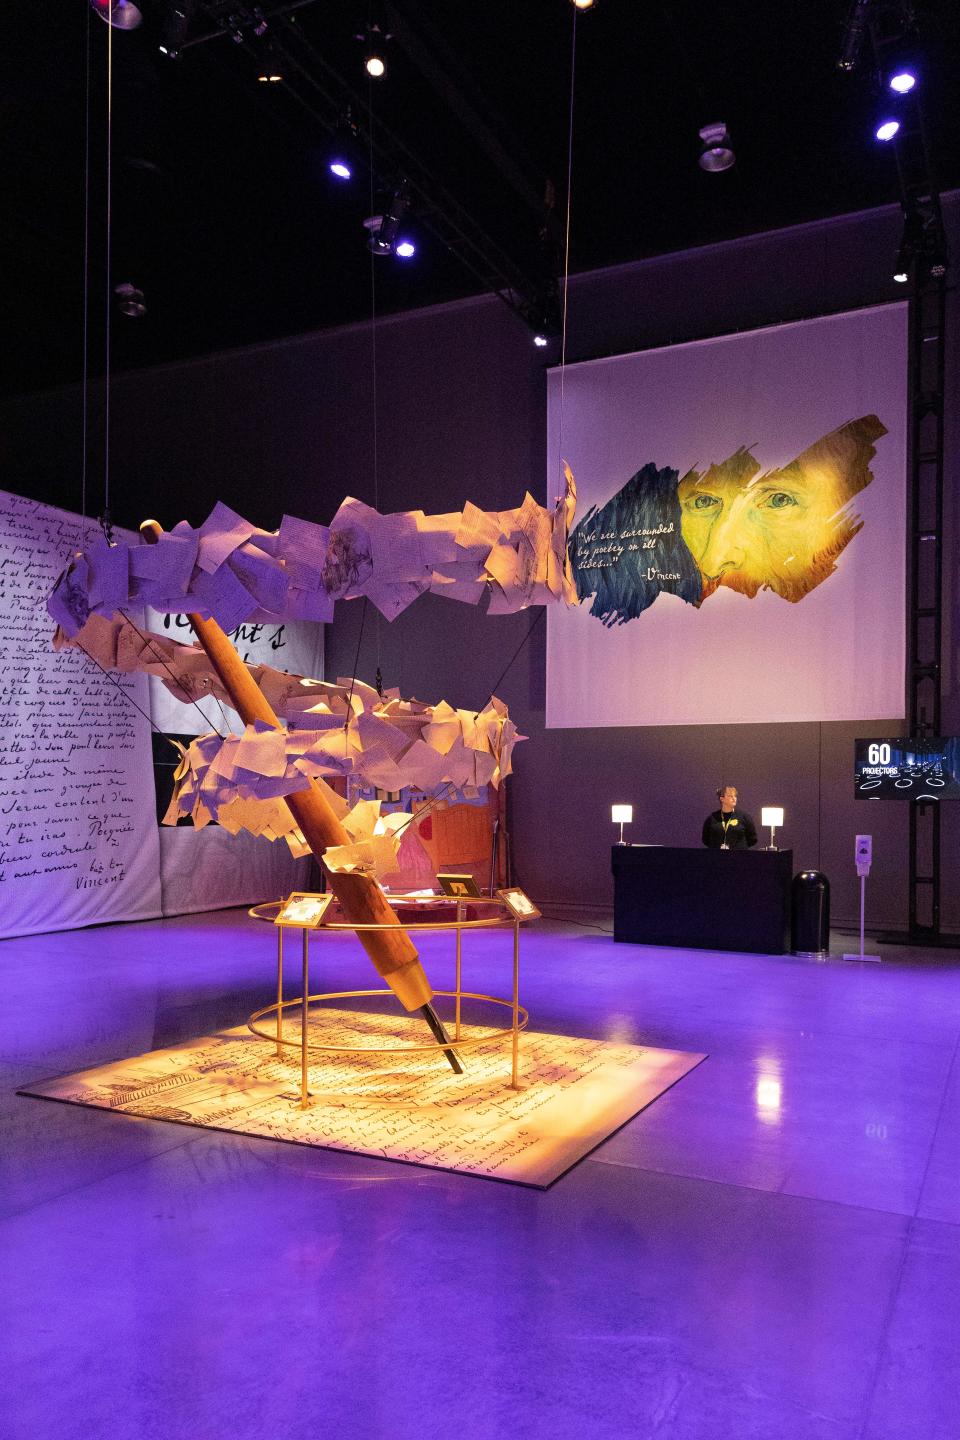 Displays about Vincent Van Gogh's life and career are exhibited outside the entrance of "Immersive Van Gogh" on Dec. 15 at the Oklahoma City Convention Center.